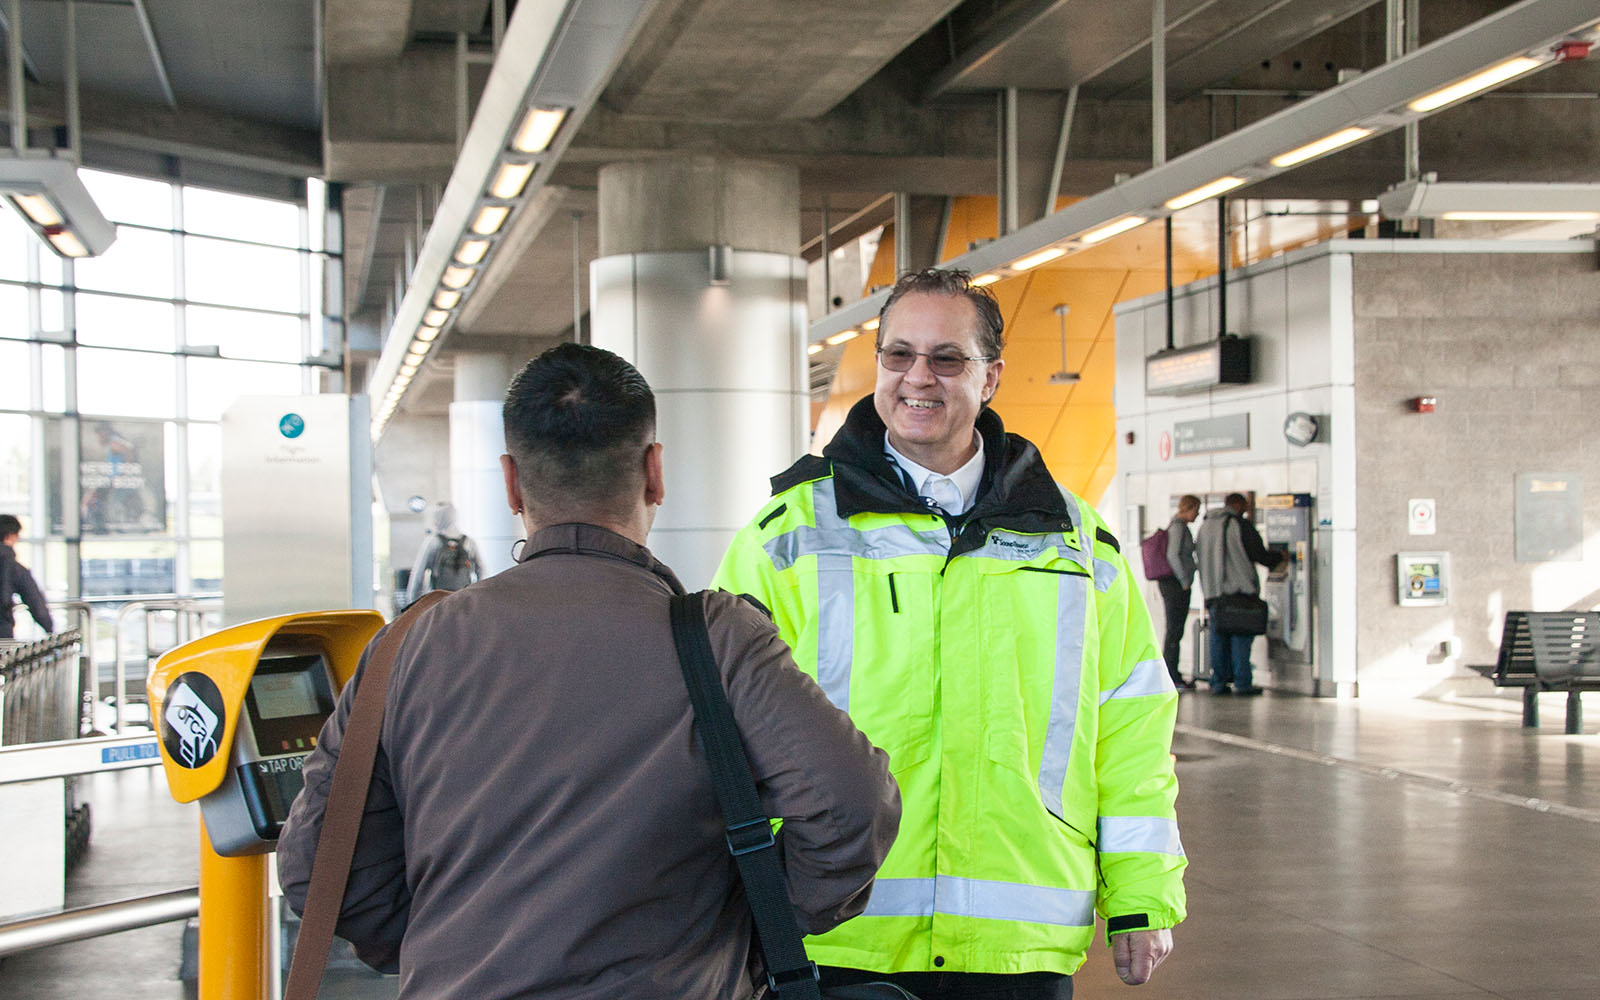 Sound Transit Station Agent helps travelers get from Sea-Tac Airport to Link light rail